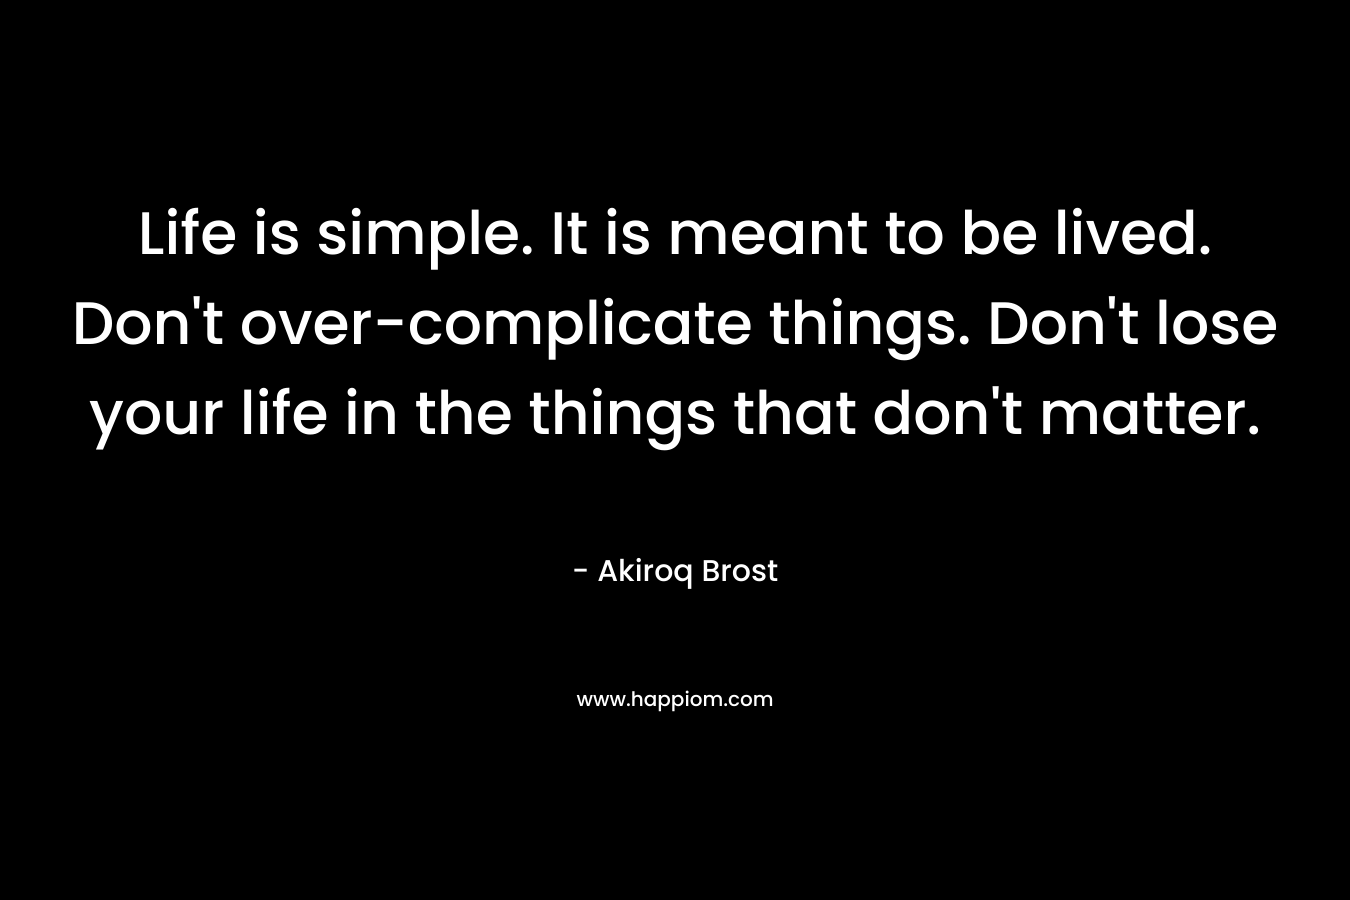 Life is simple. It is meant to be lived. Don't over-complicate things. Don't lose your life in the things that don't matter.